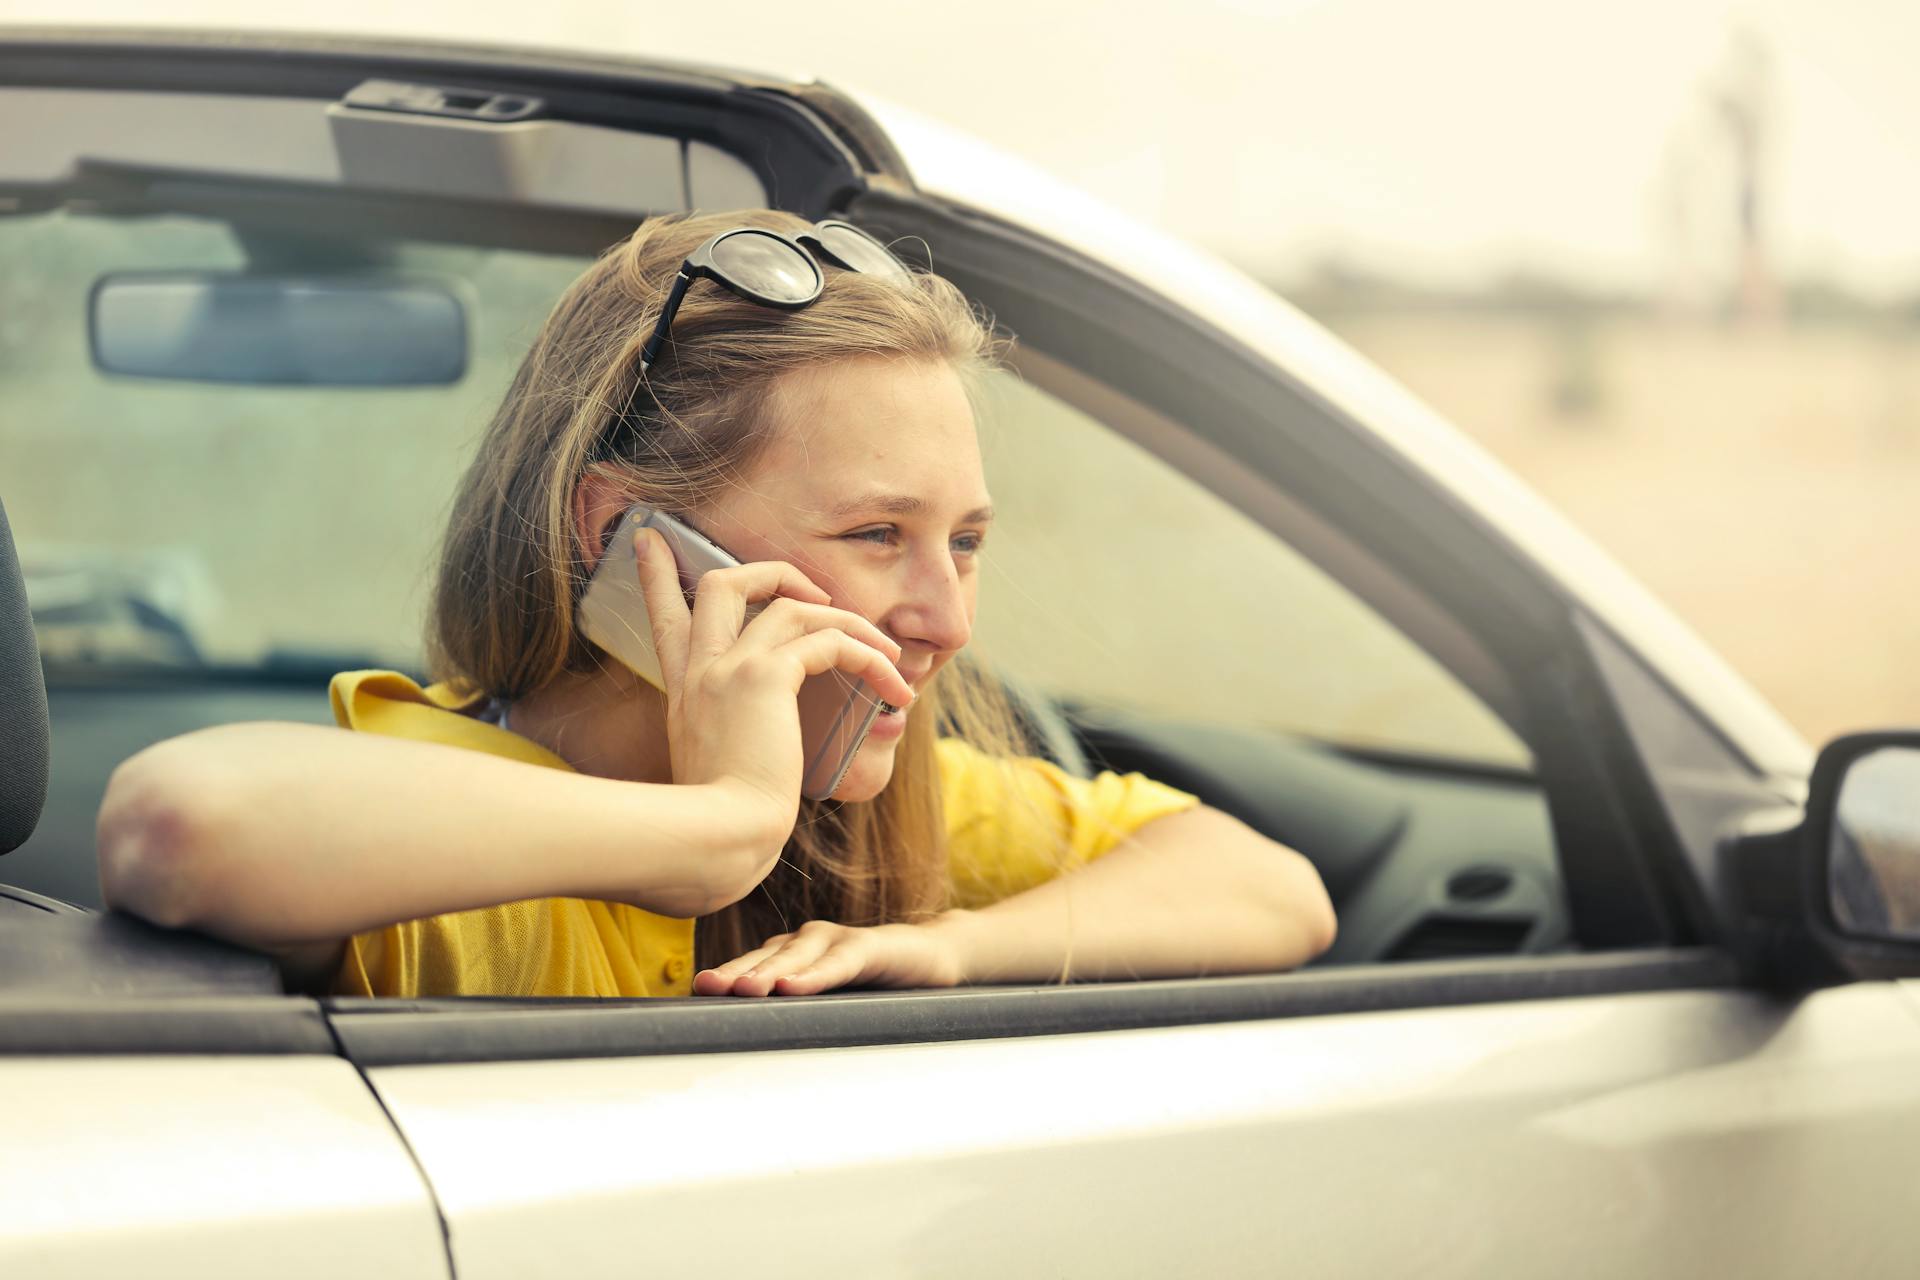 A woman in a car talking over the phone | Source: Pexels